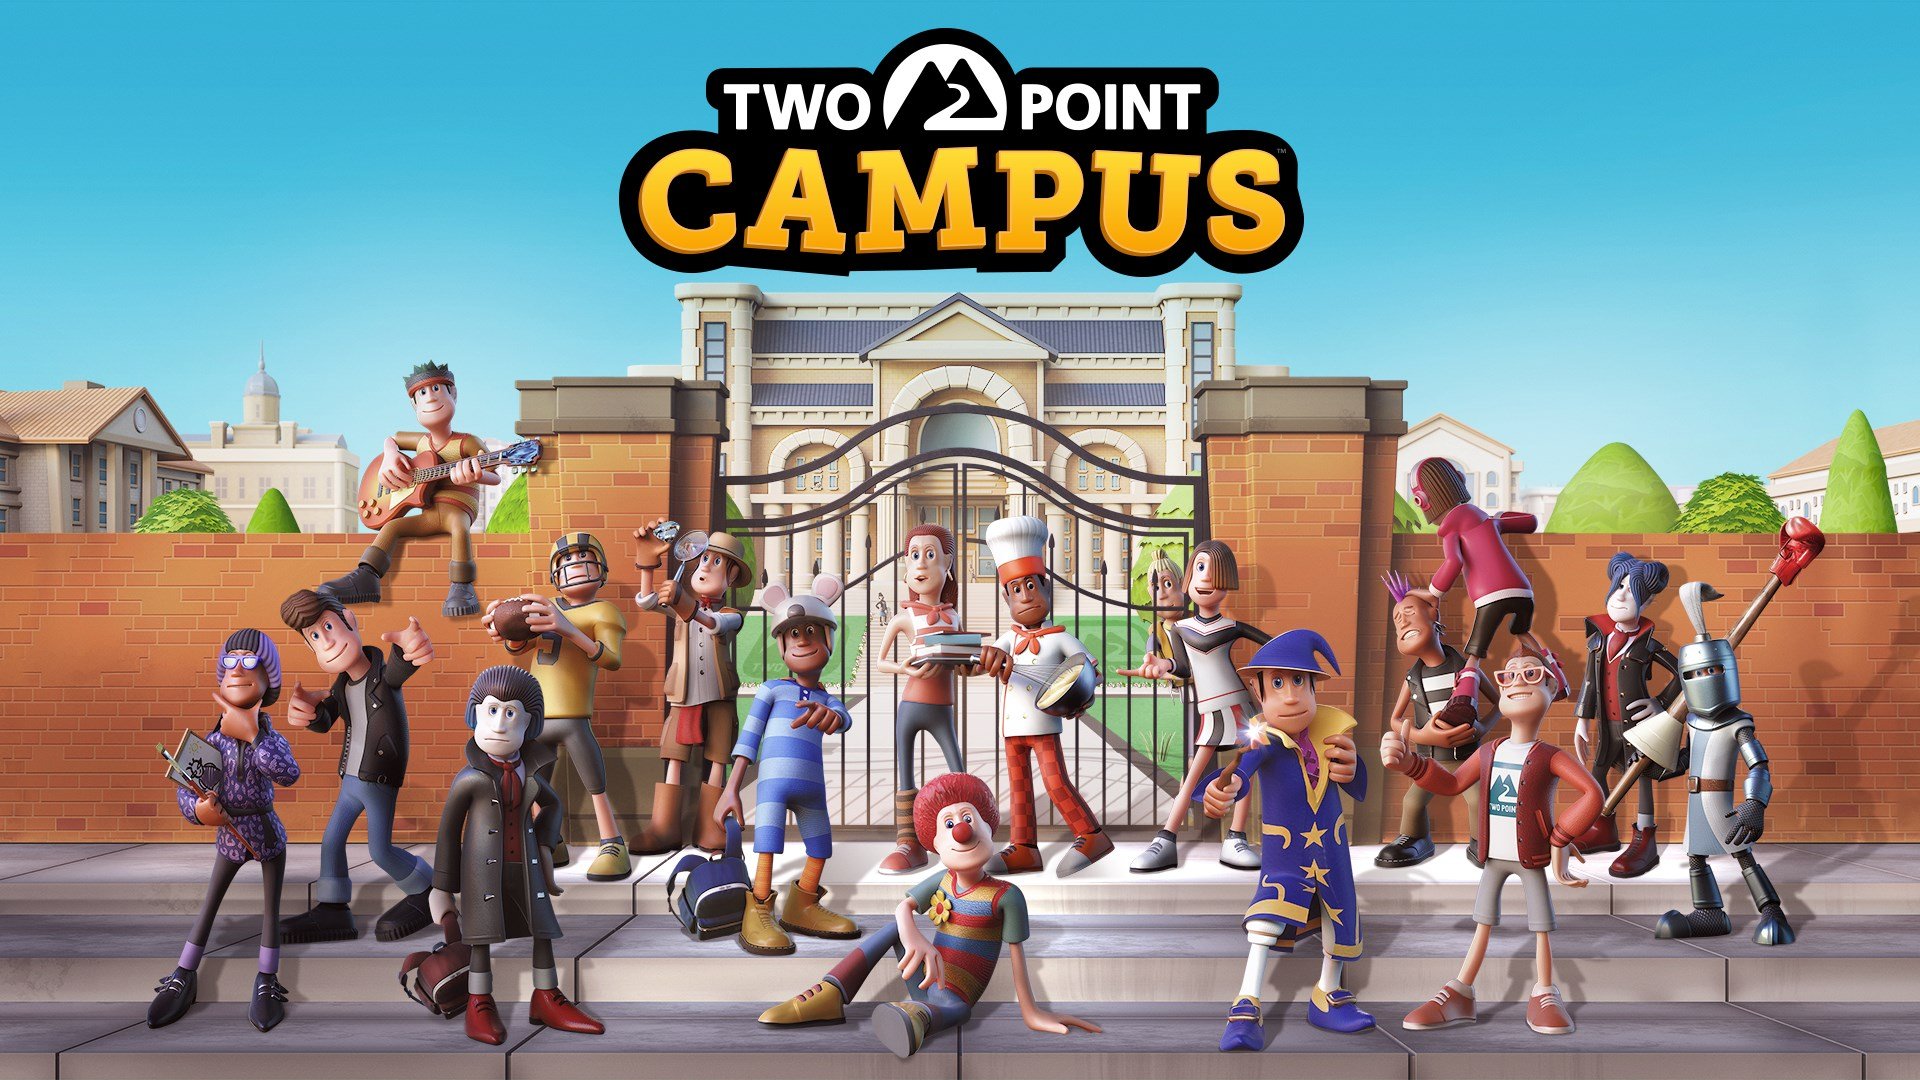 Two-Point Campus